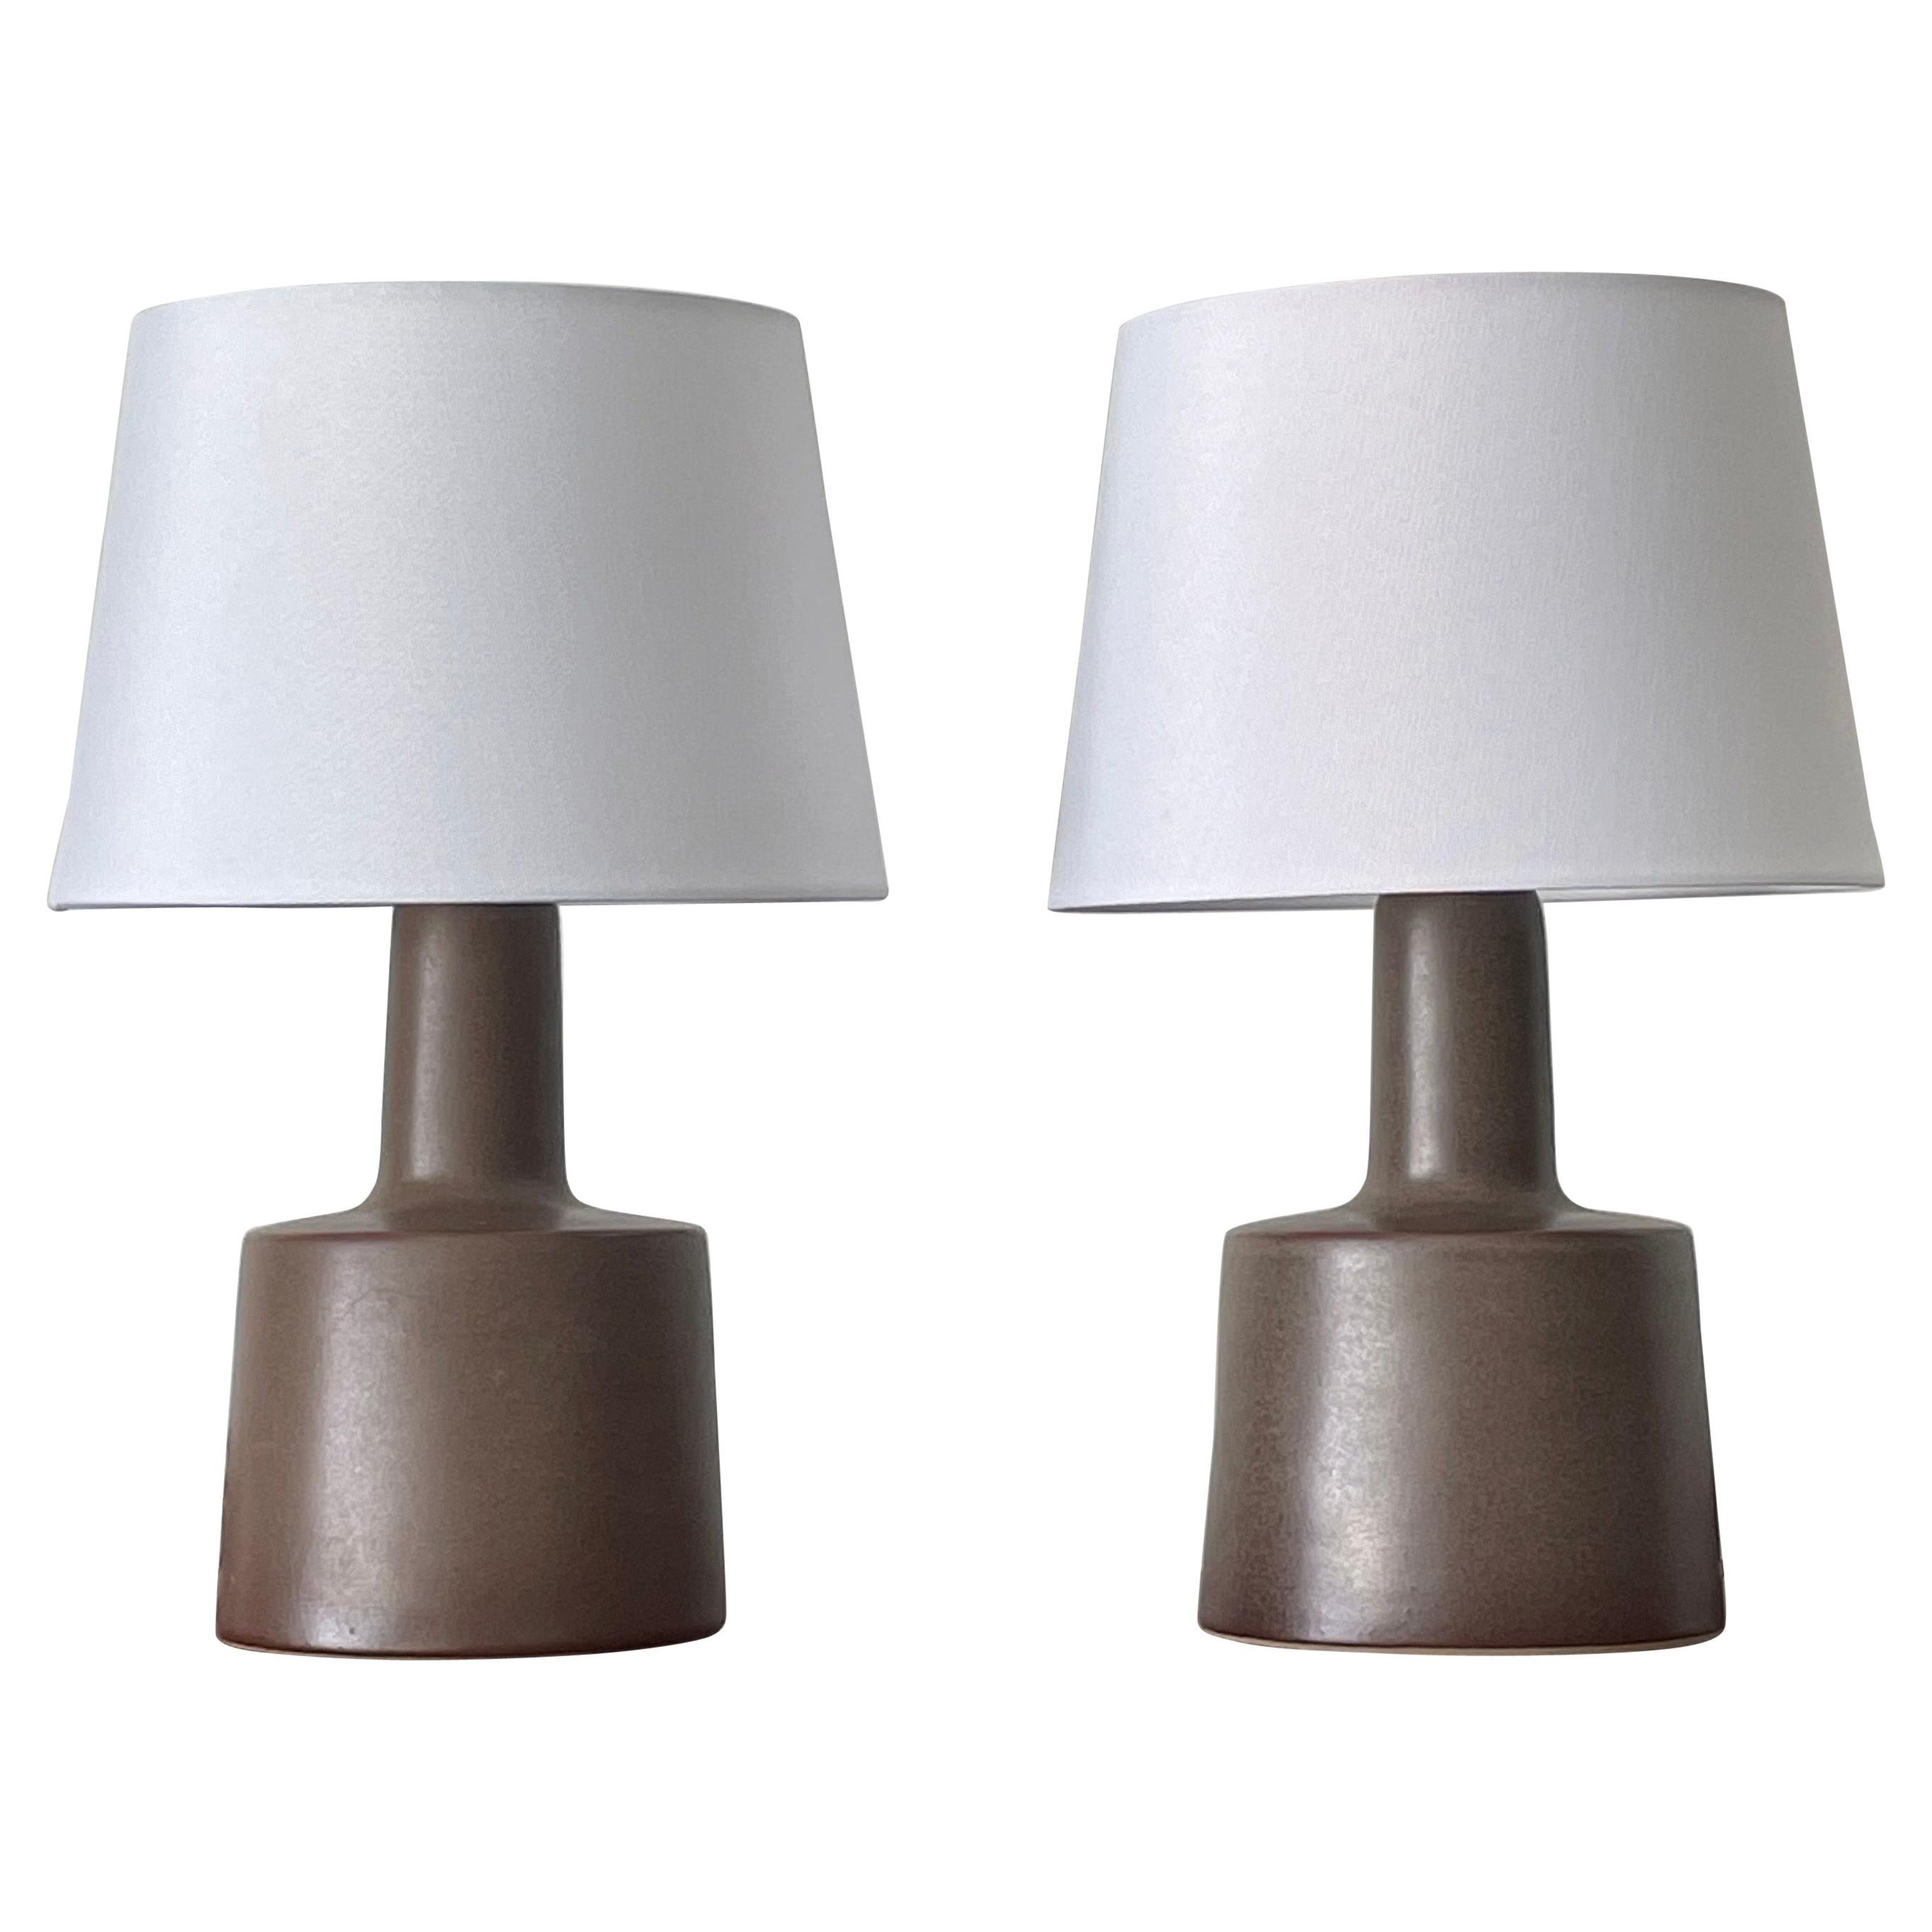 Pair of Table Lamps by Jane and Gordon Martz, Ceramic